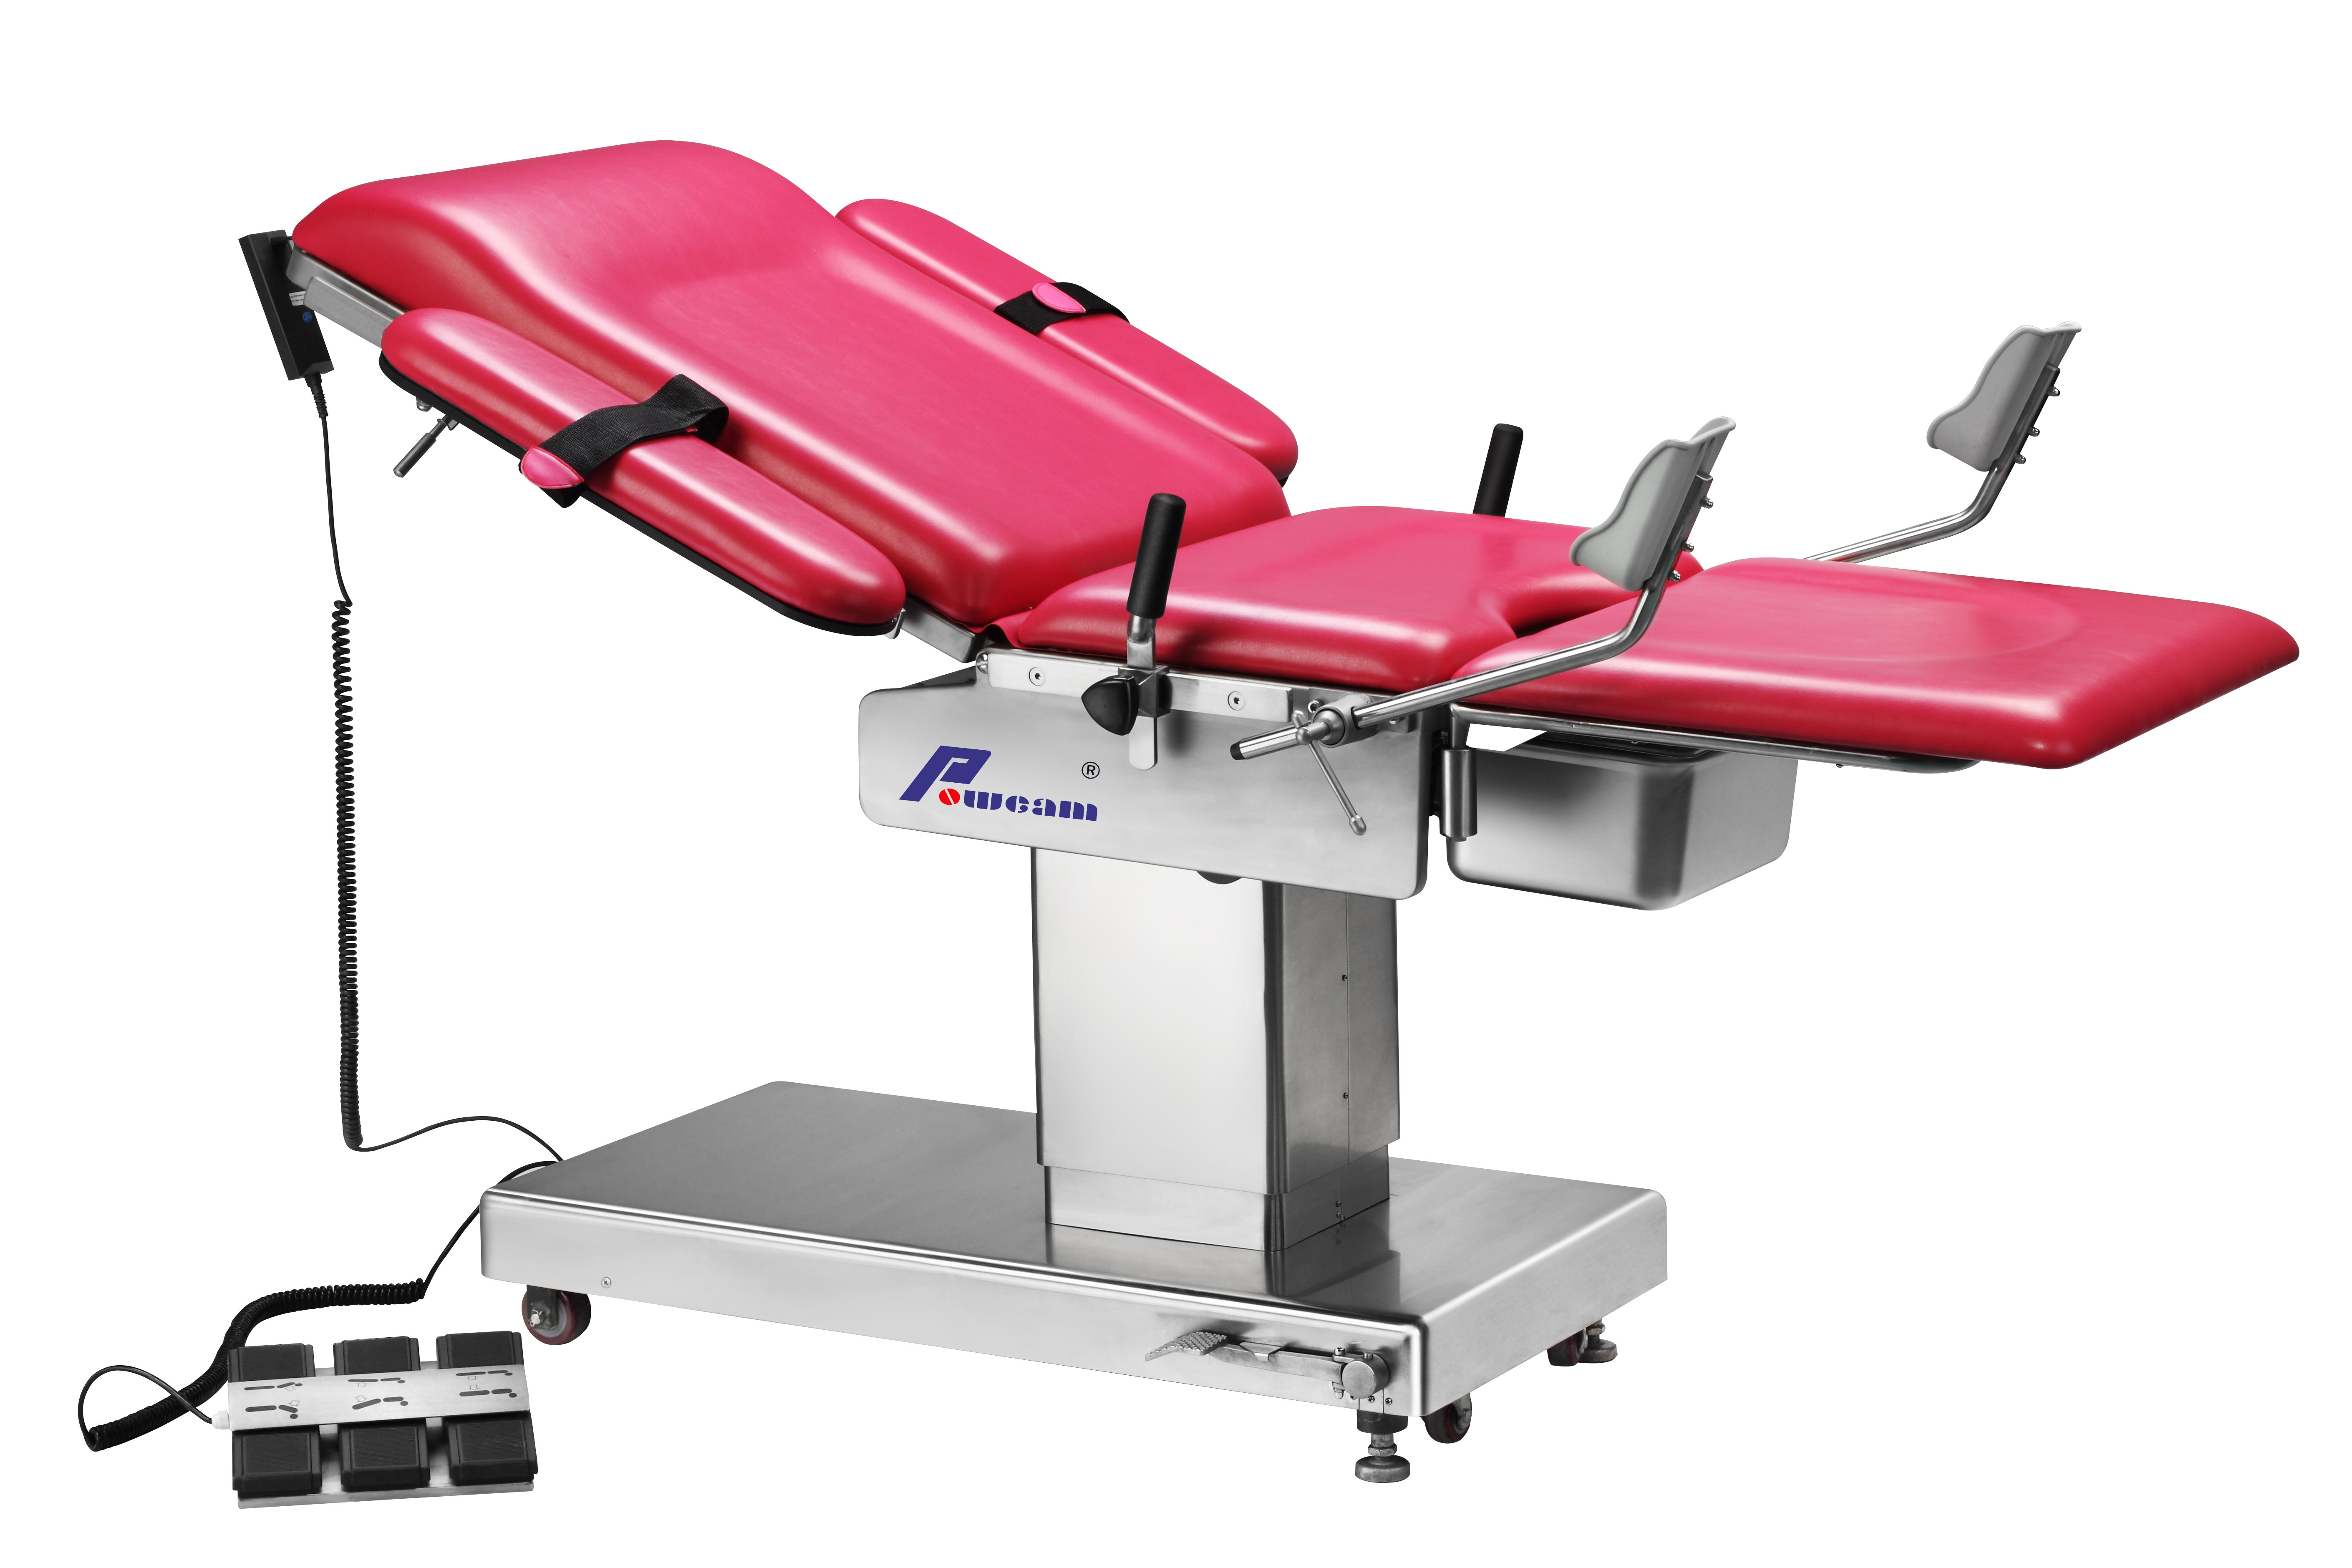 Hosipital Electric Operating Table Gyn Exam Table HB4000